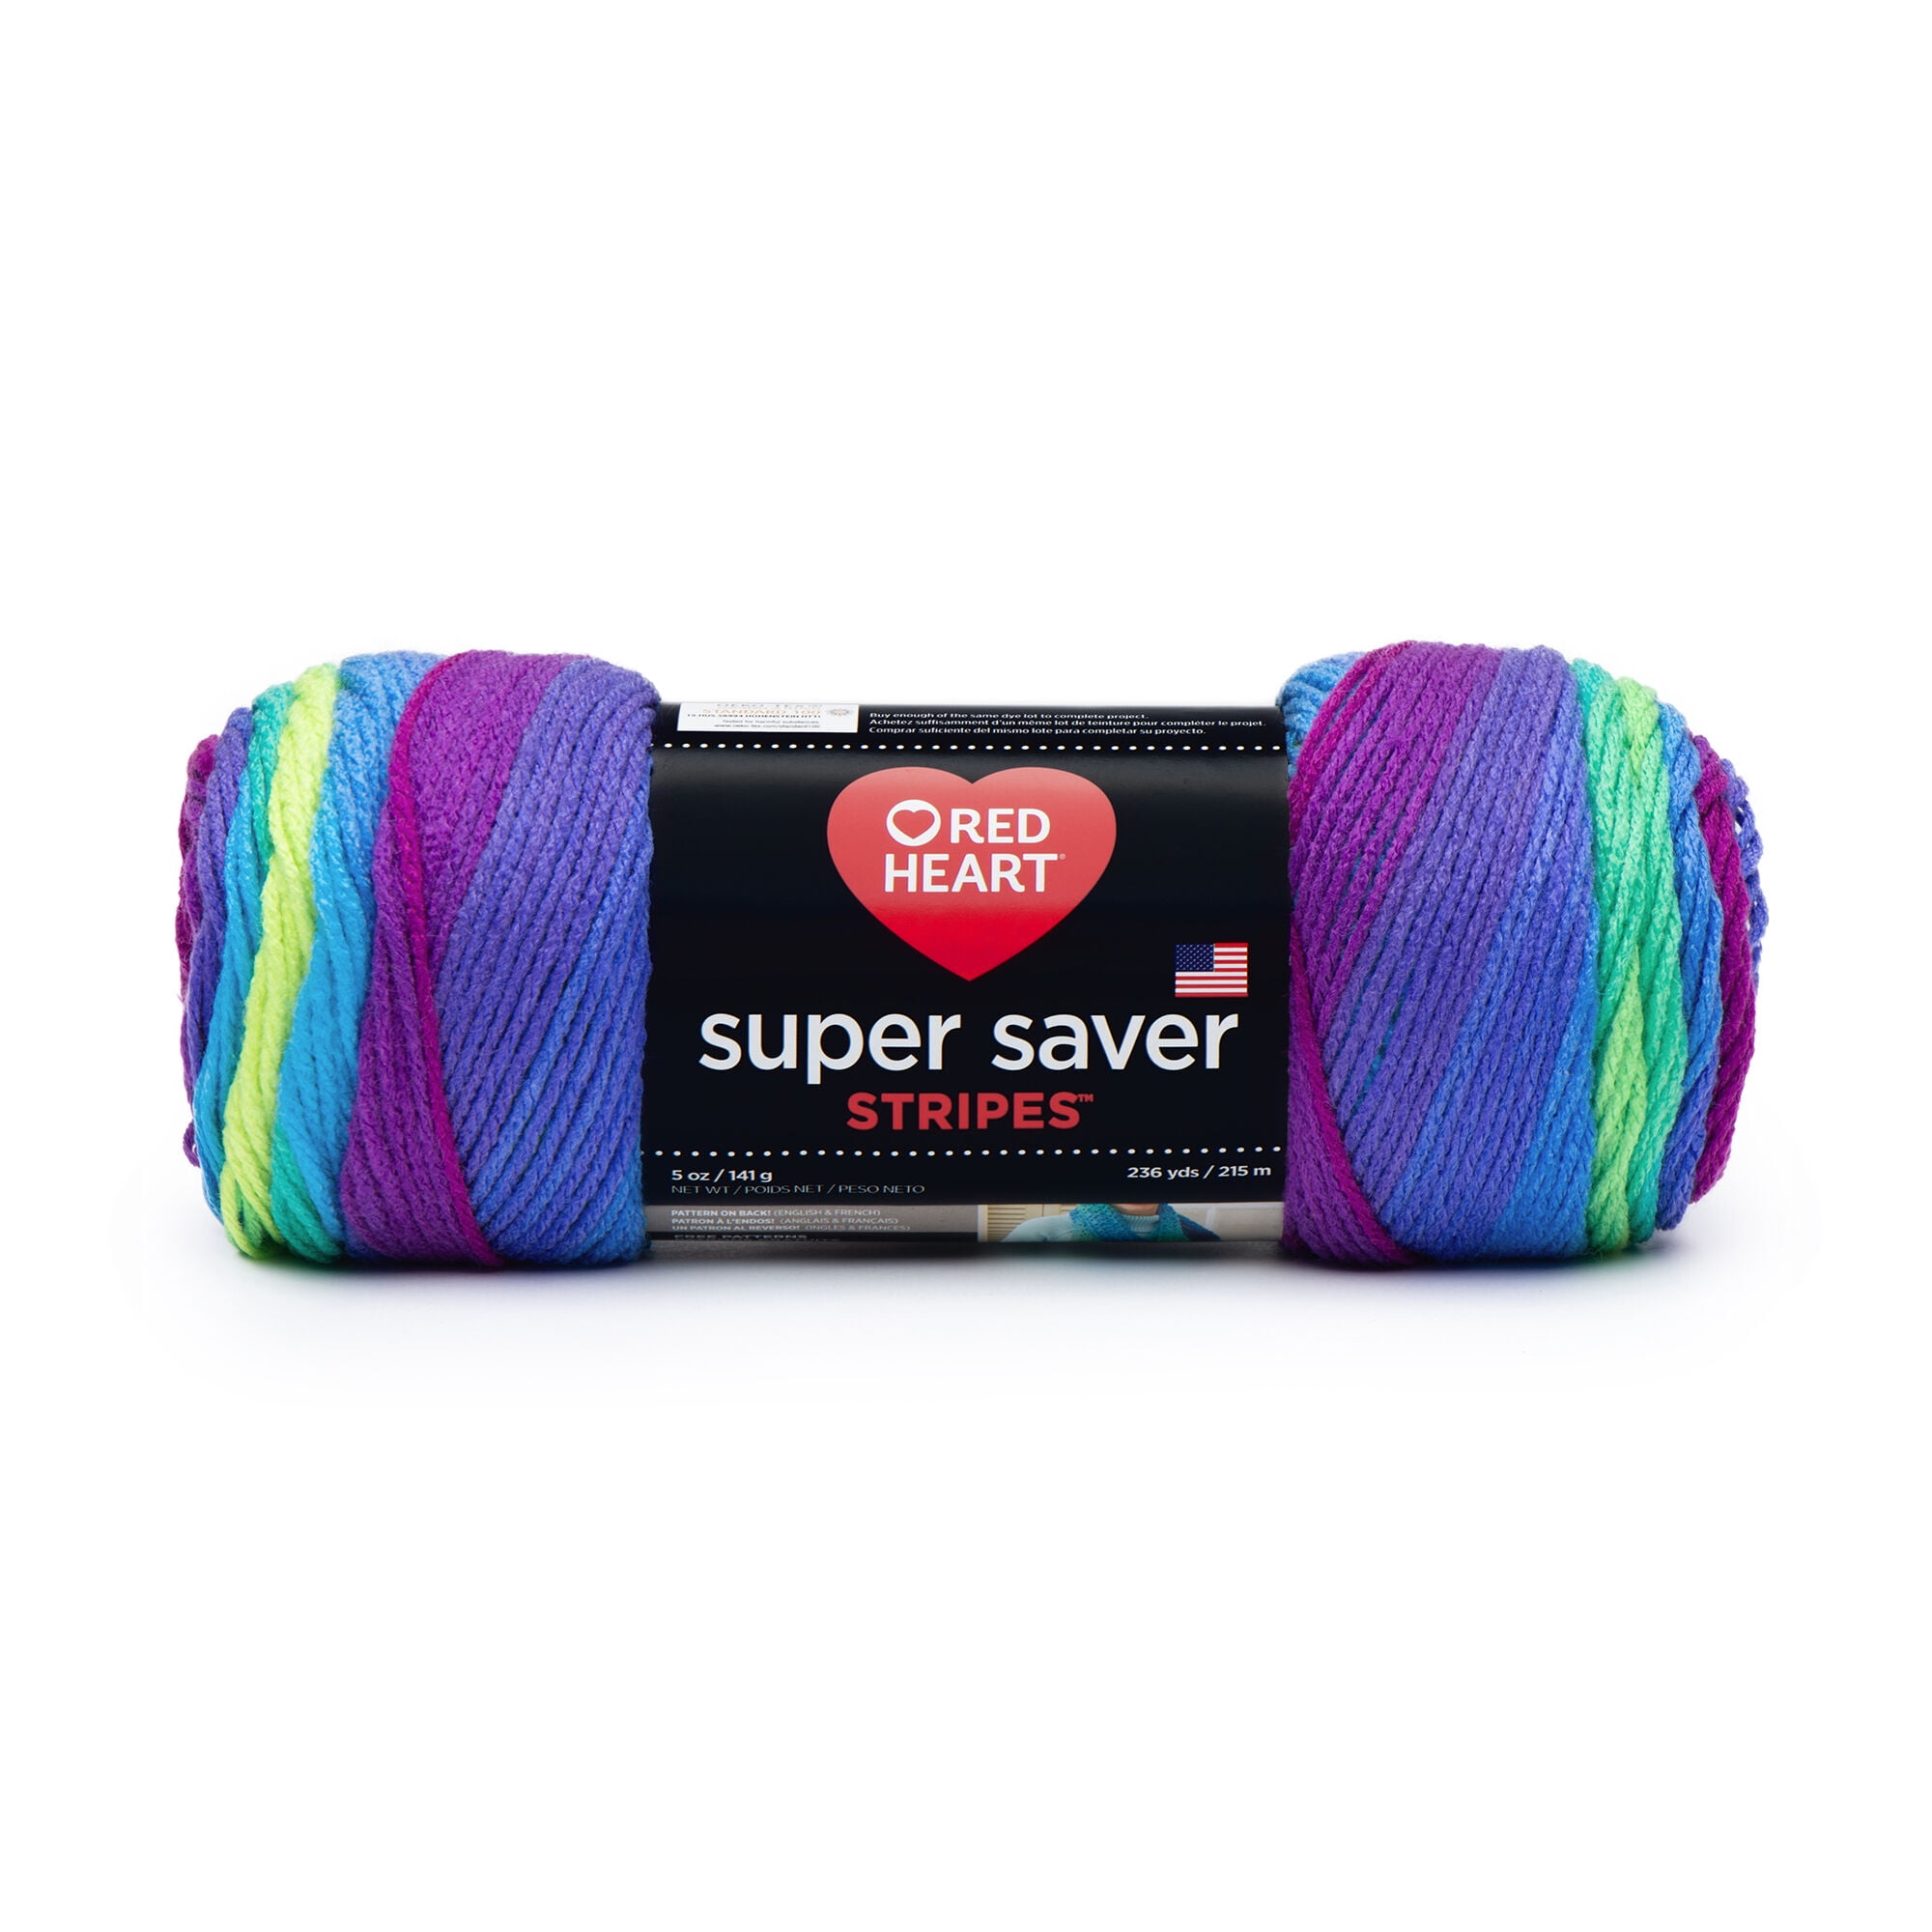 Red Heart Super Saver Size 4 Acrylic Parrot Yarn, 236 yd 